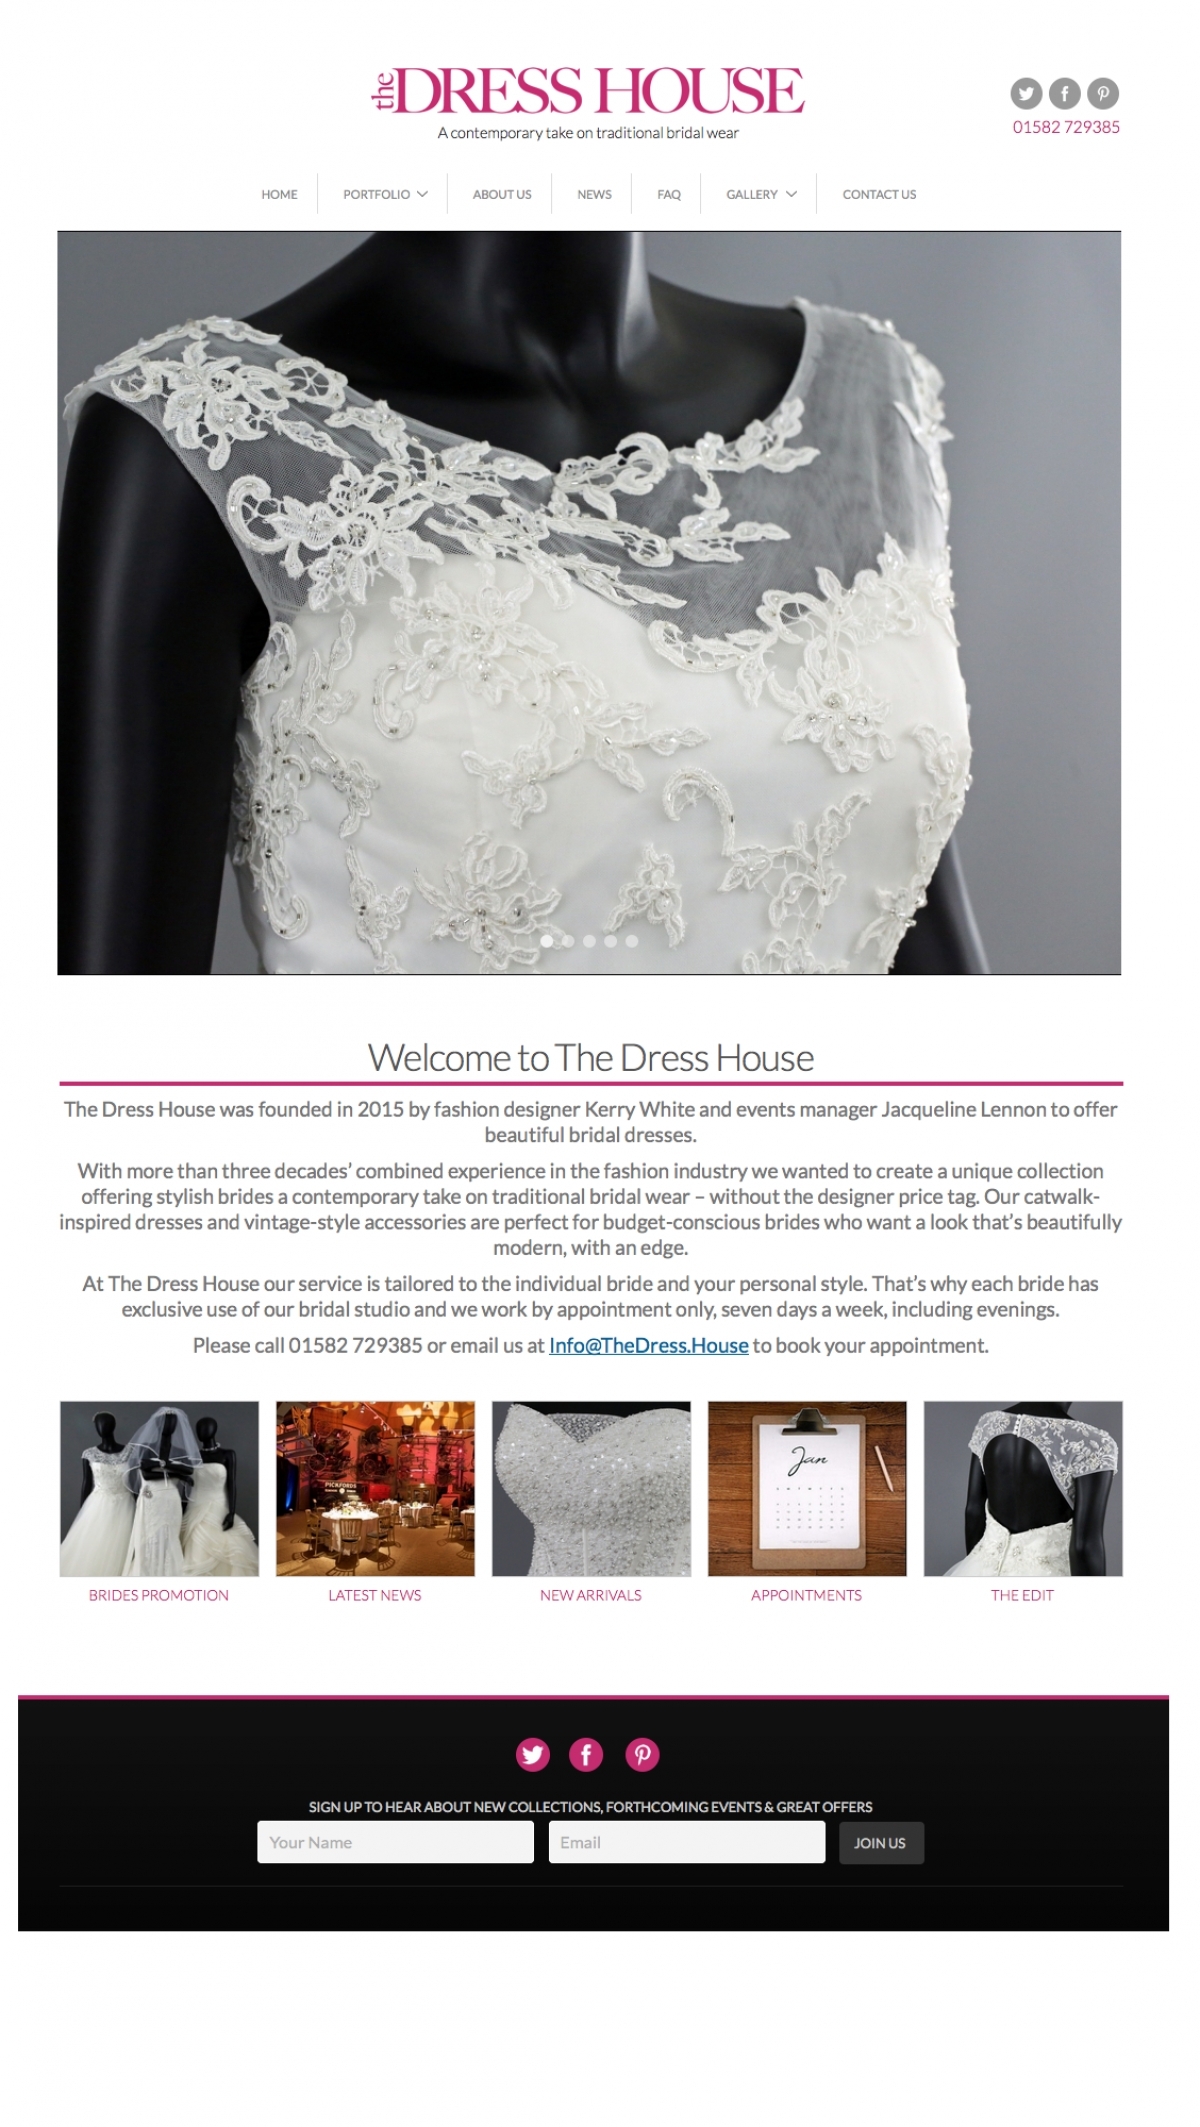 The Dress House - contemporary and traditional wedding dresses Herts Media's first "dot house" site...